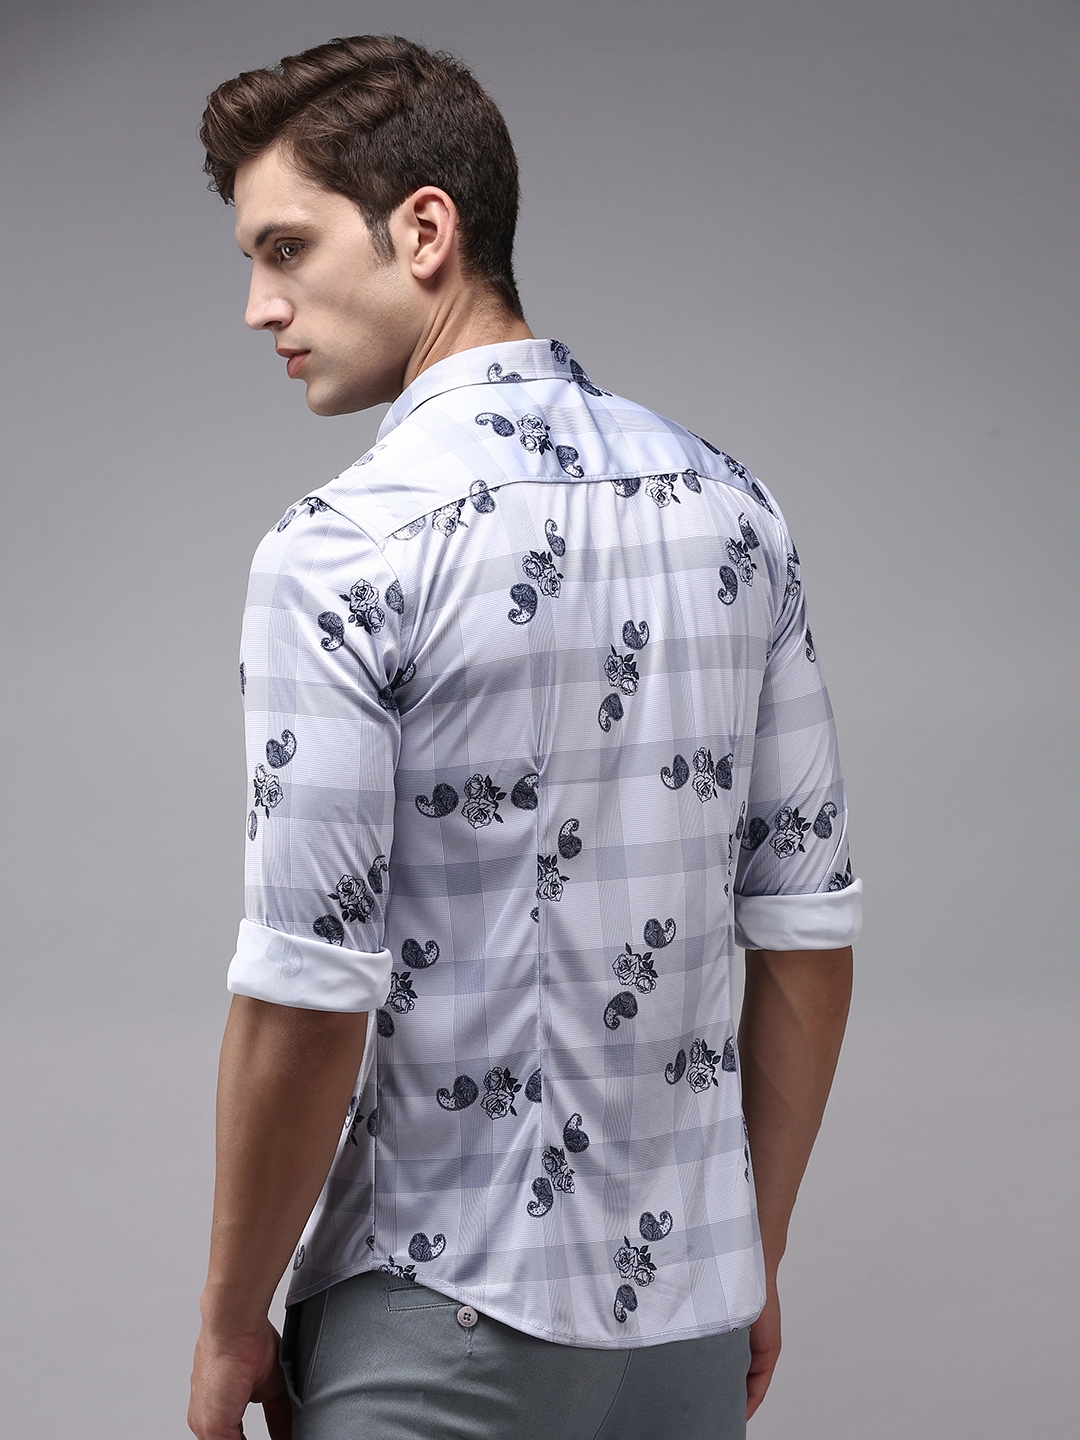 Men's Purple Polyester Printed Casual Shirts